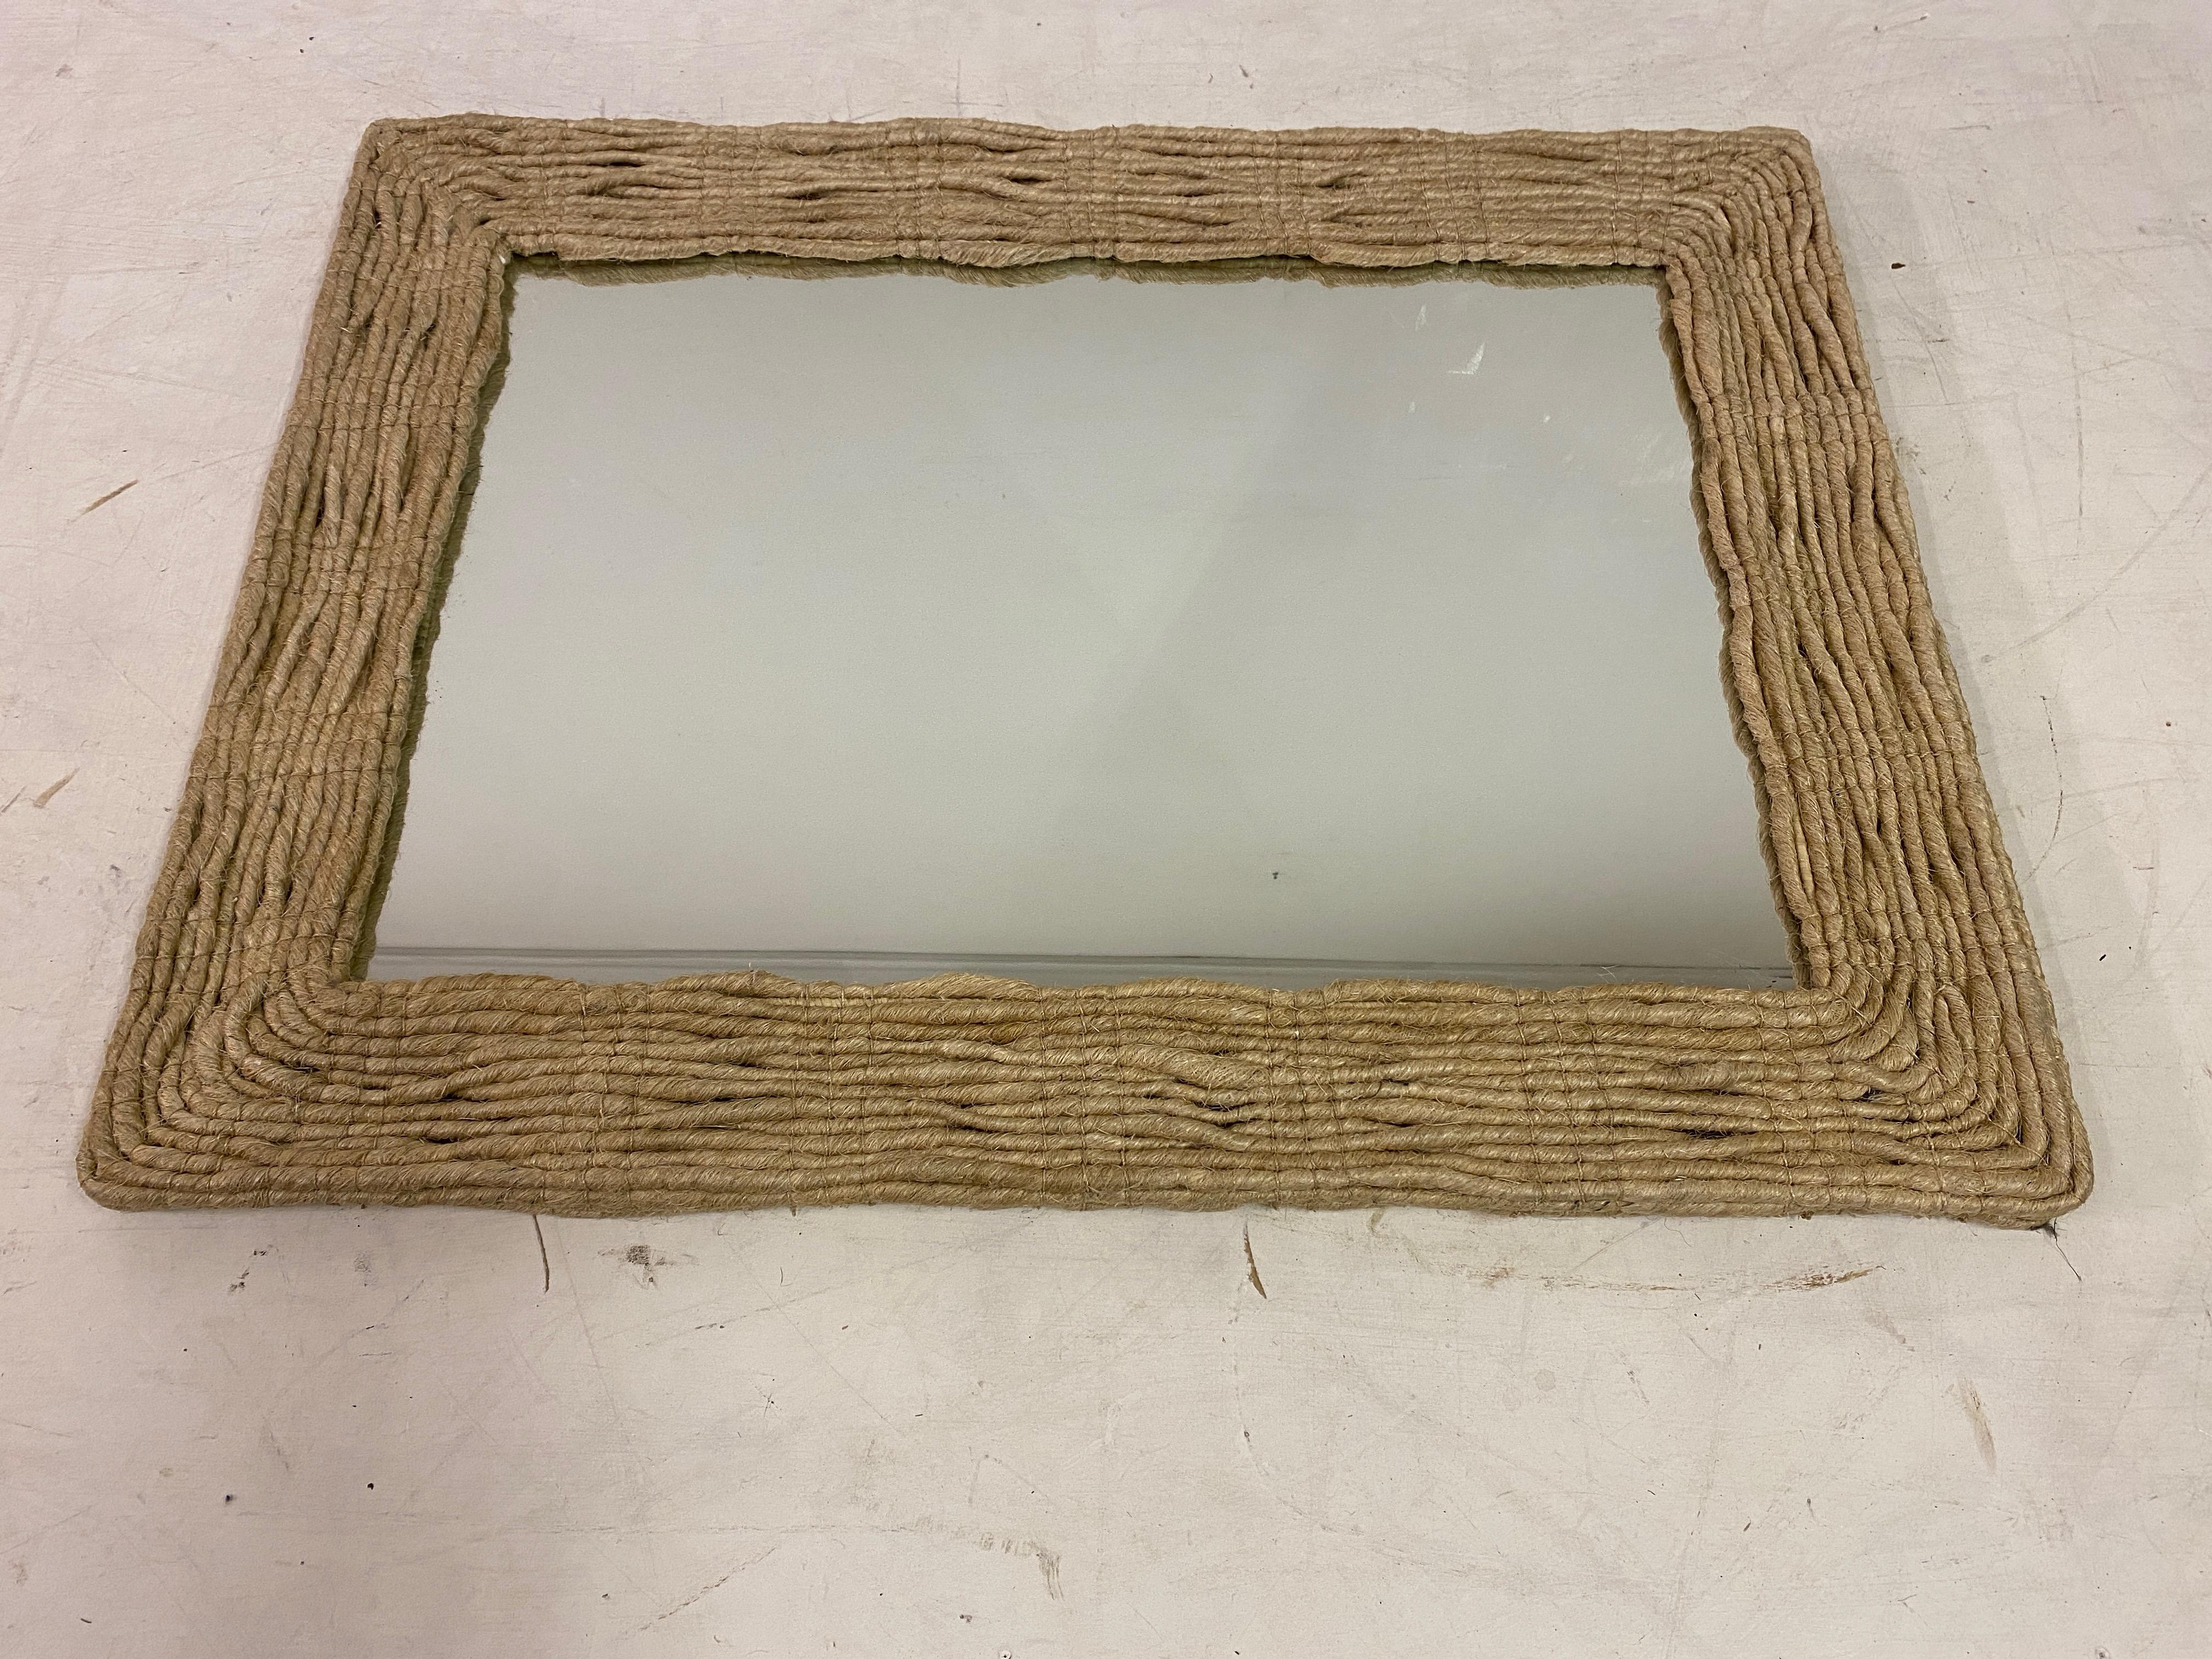 Contemporary Amani Mirror By Made Goods In Excellent Condition For Sale In London, London